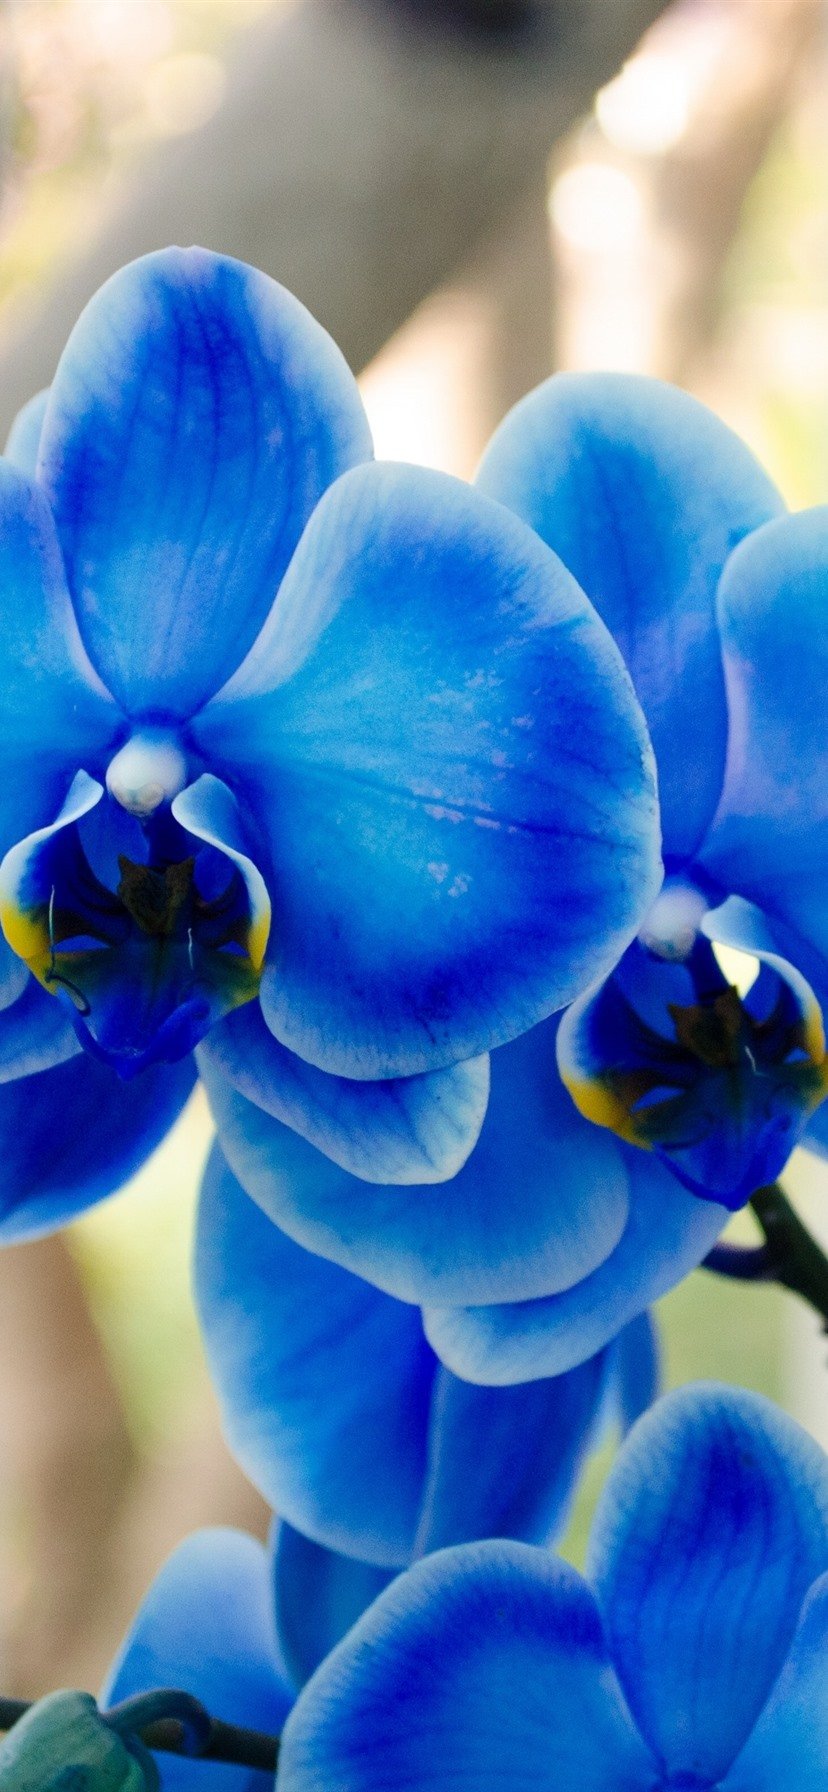 Blue Phalaenopsis, Orchid 1080x1920 IPhone 8 7 6 6S Plus Wallpaper, Background, Picture, Image